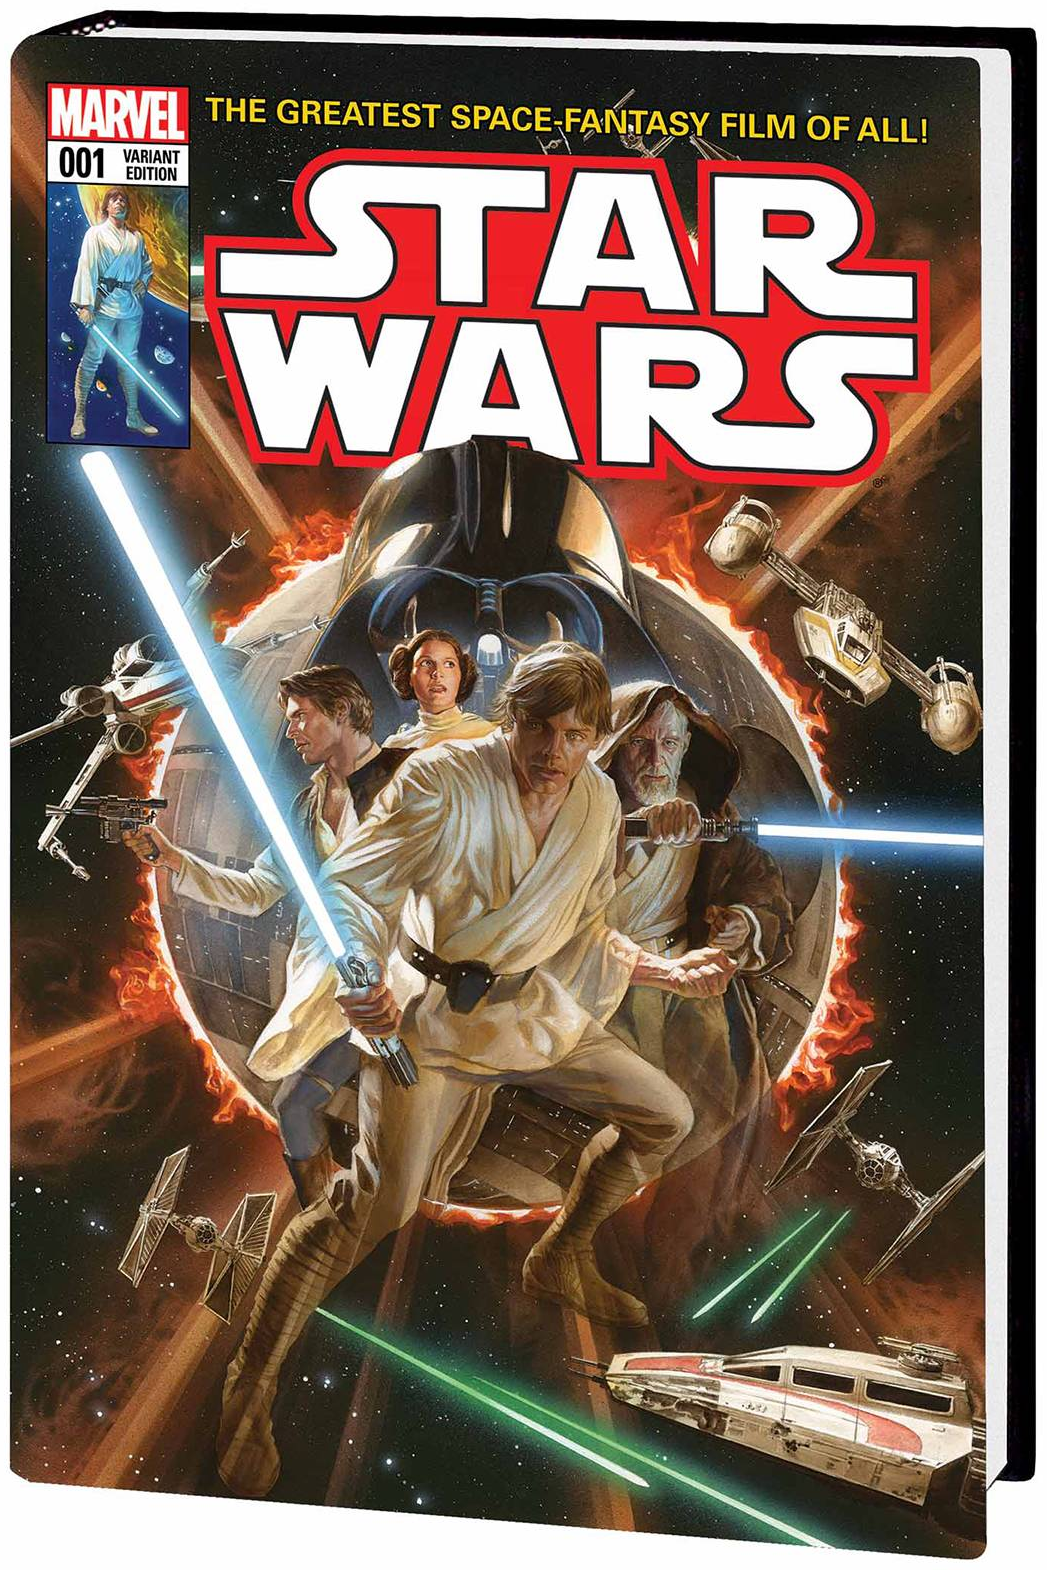 STAR WARS THE MARVEL COVERS